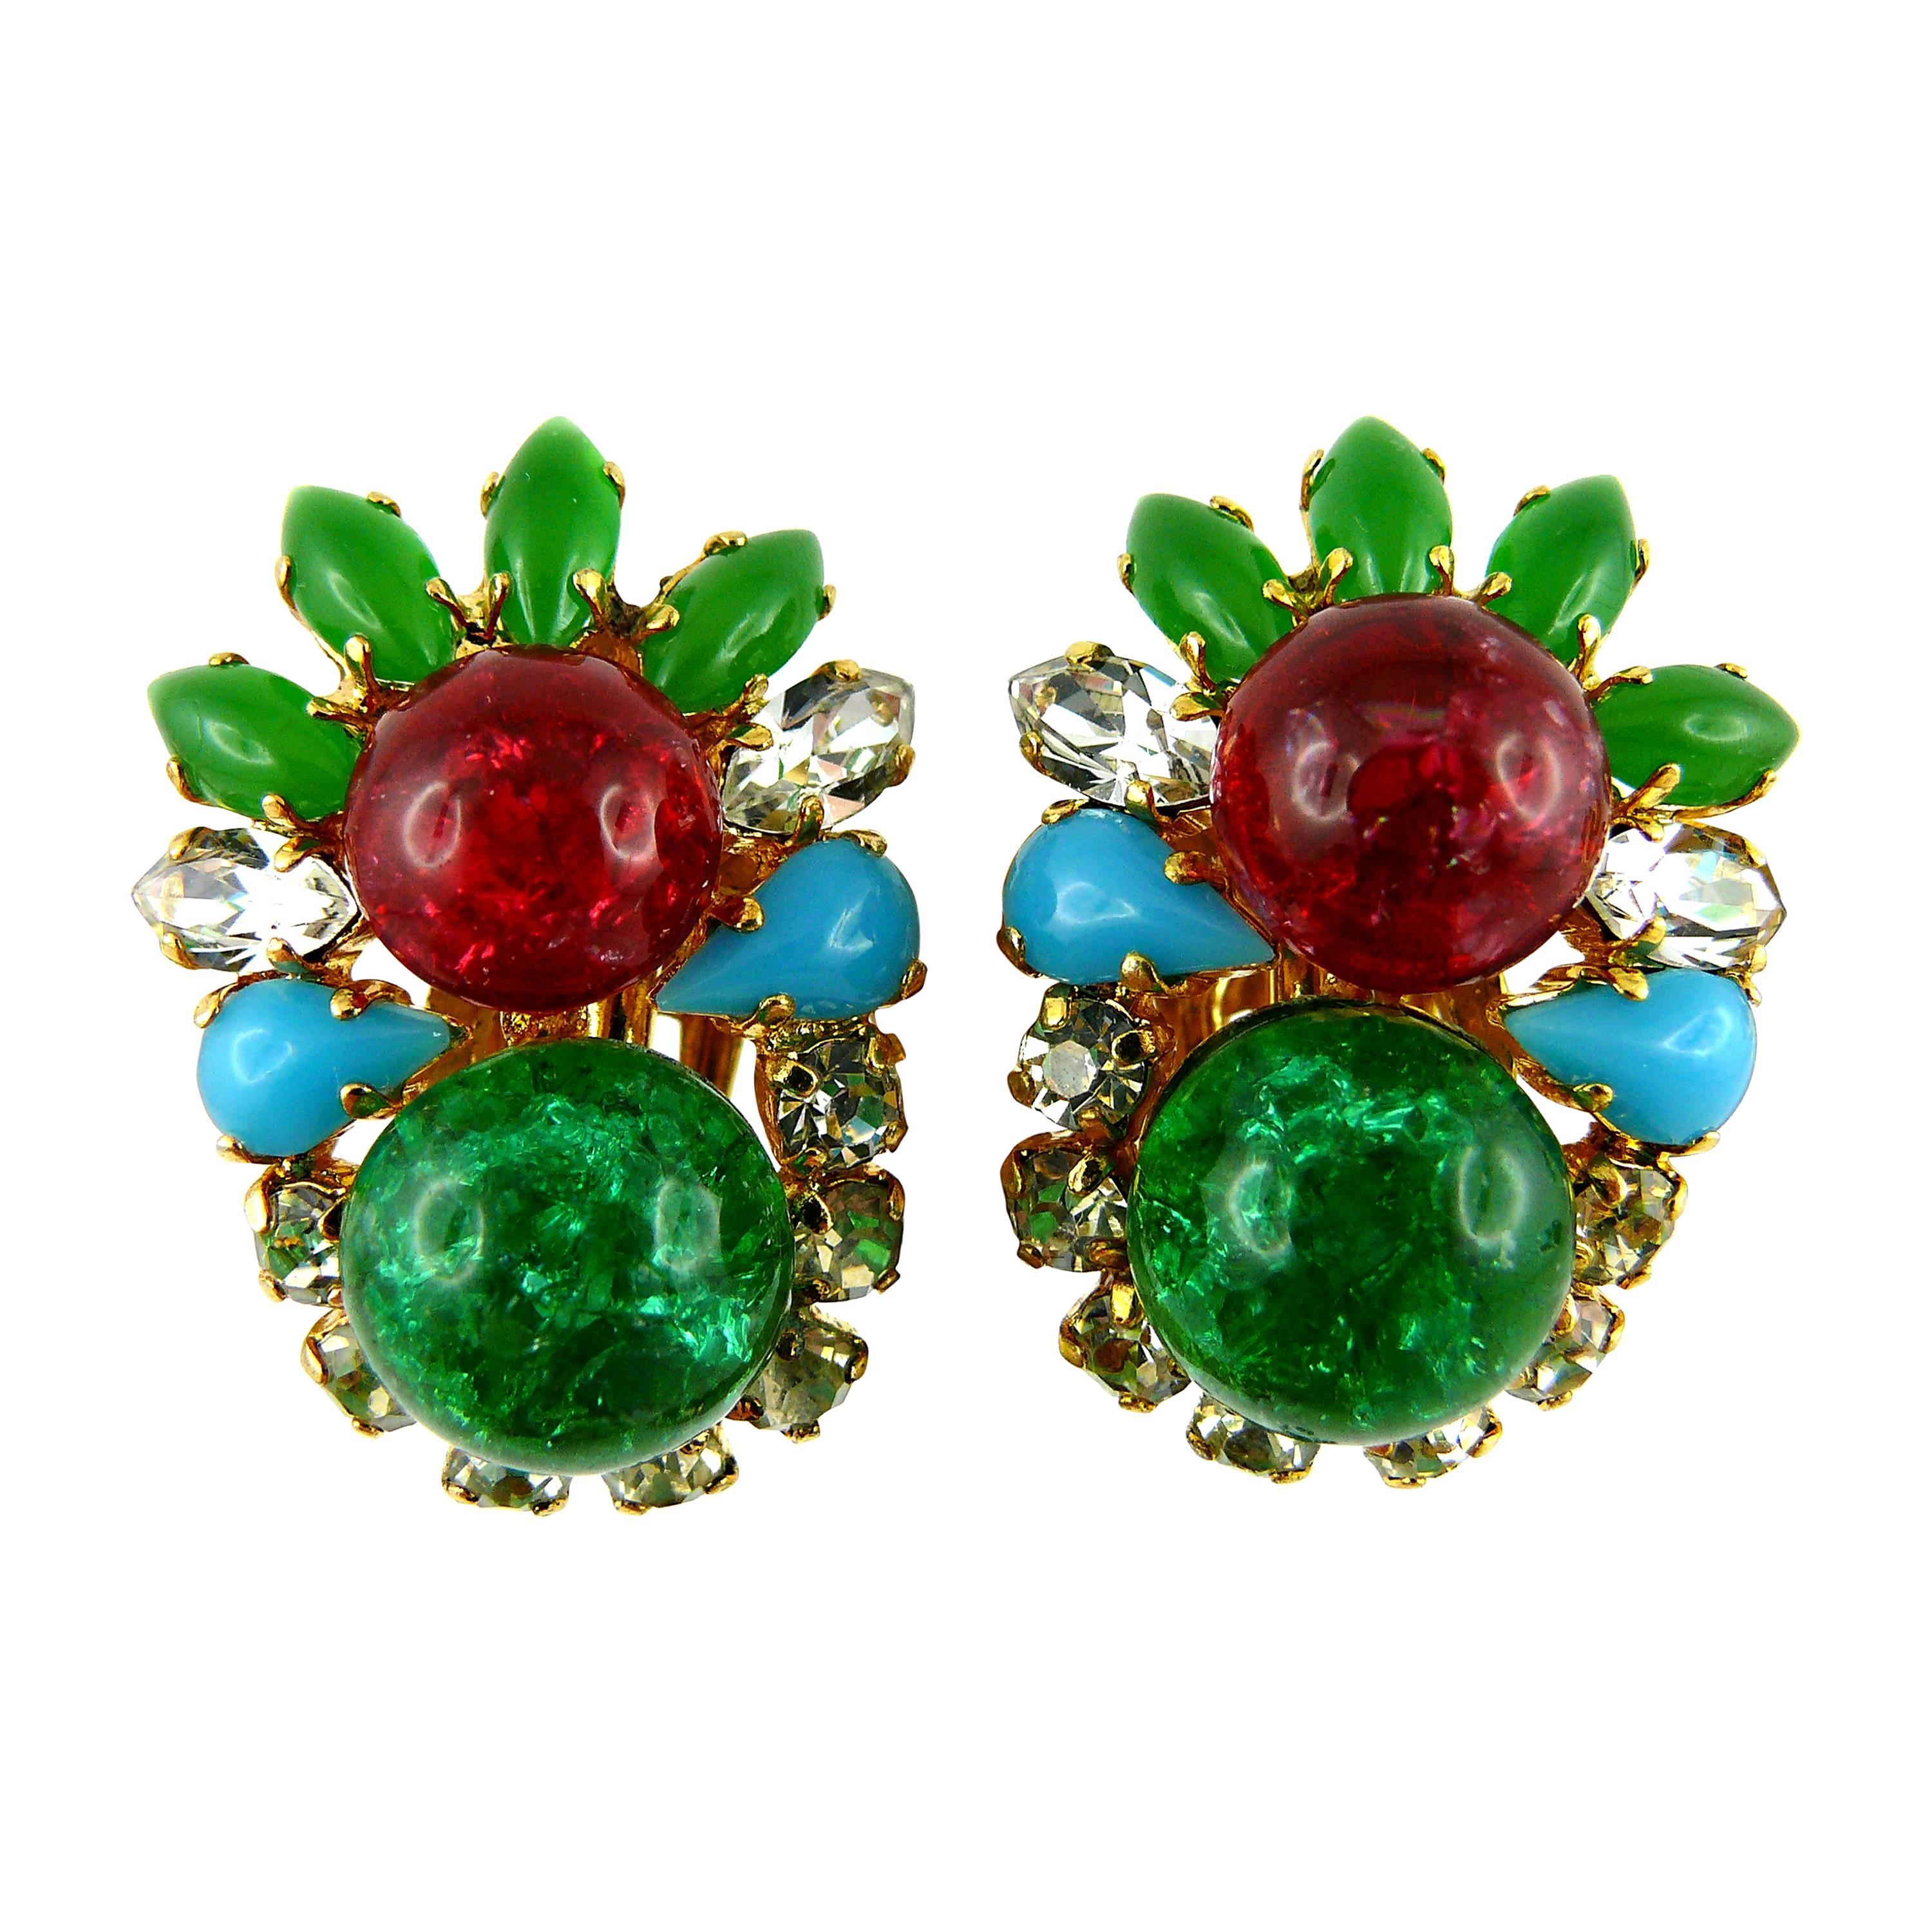 Christian Dior Vintage 1967 Mughal Inspired Clip On Earrings